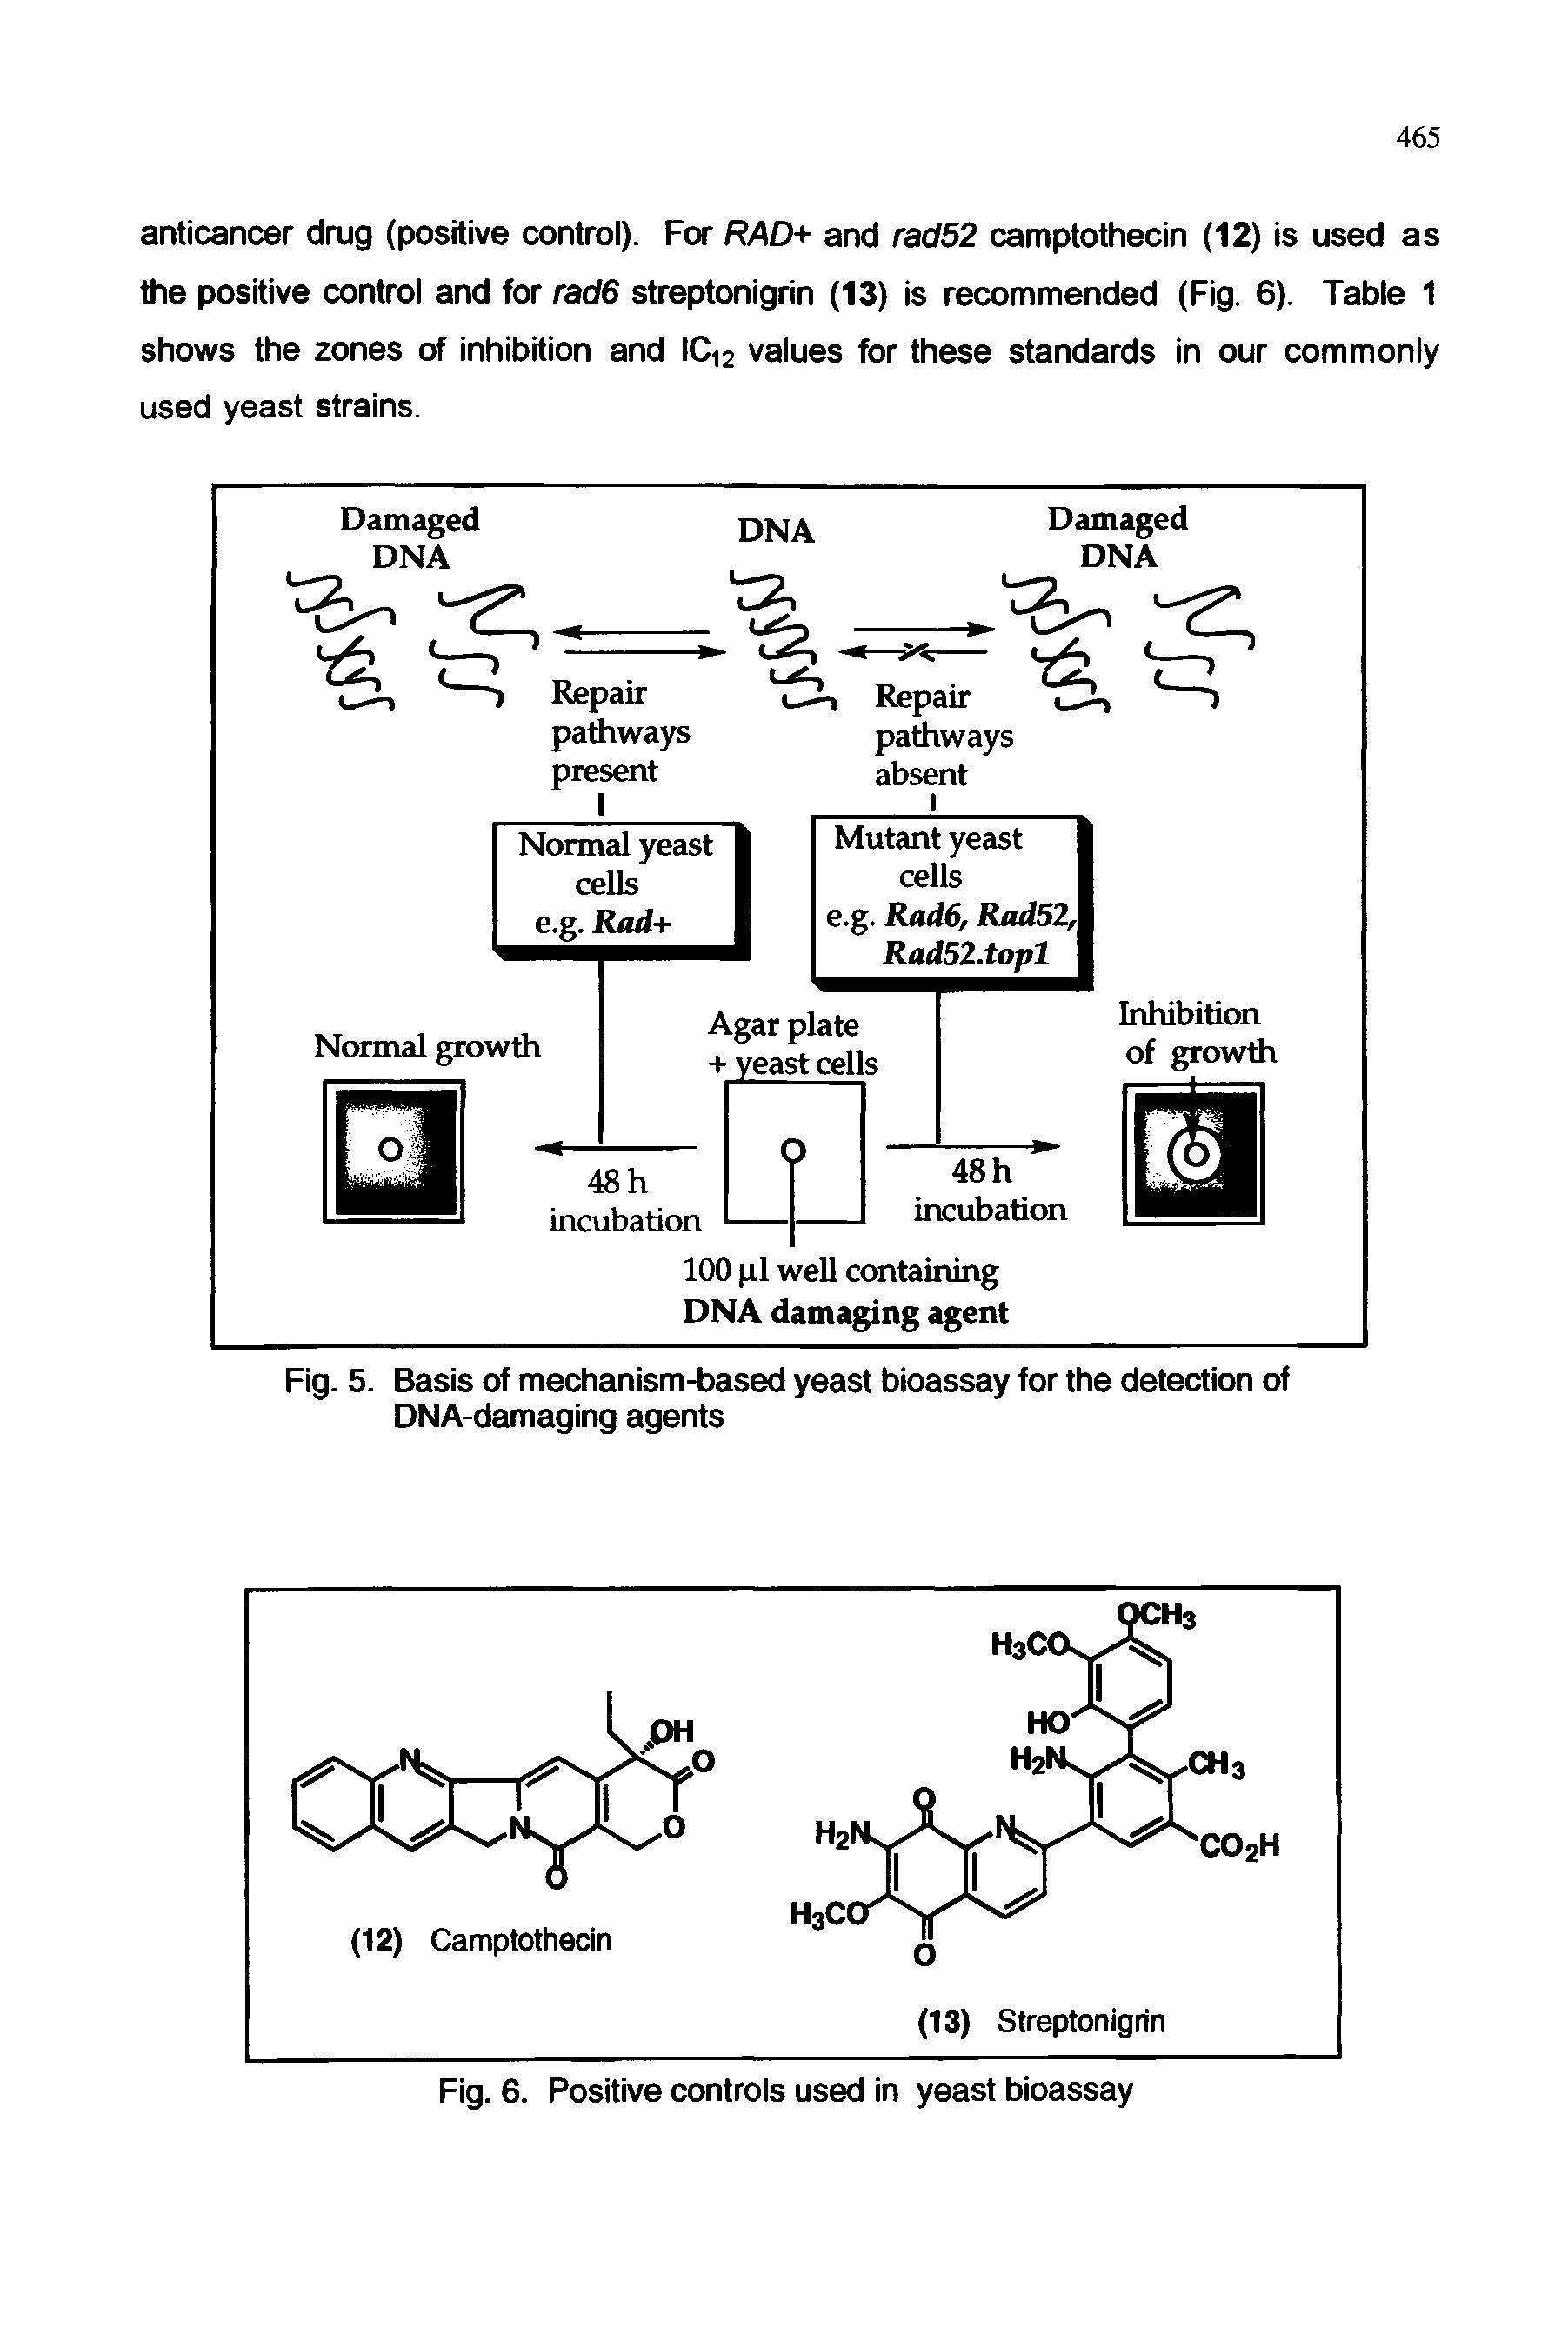 Fig. 5. Basis of mechanism-based yeast bioassay for the detection of DNA-damaging agents...